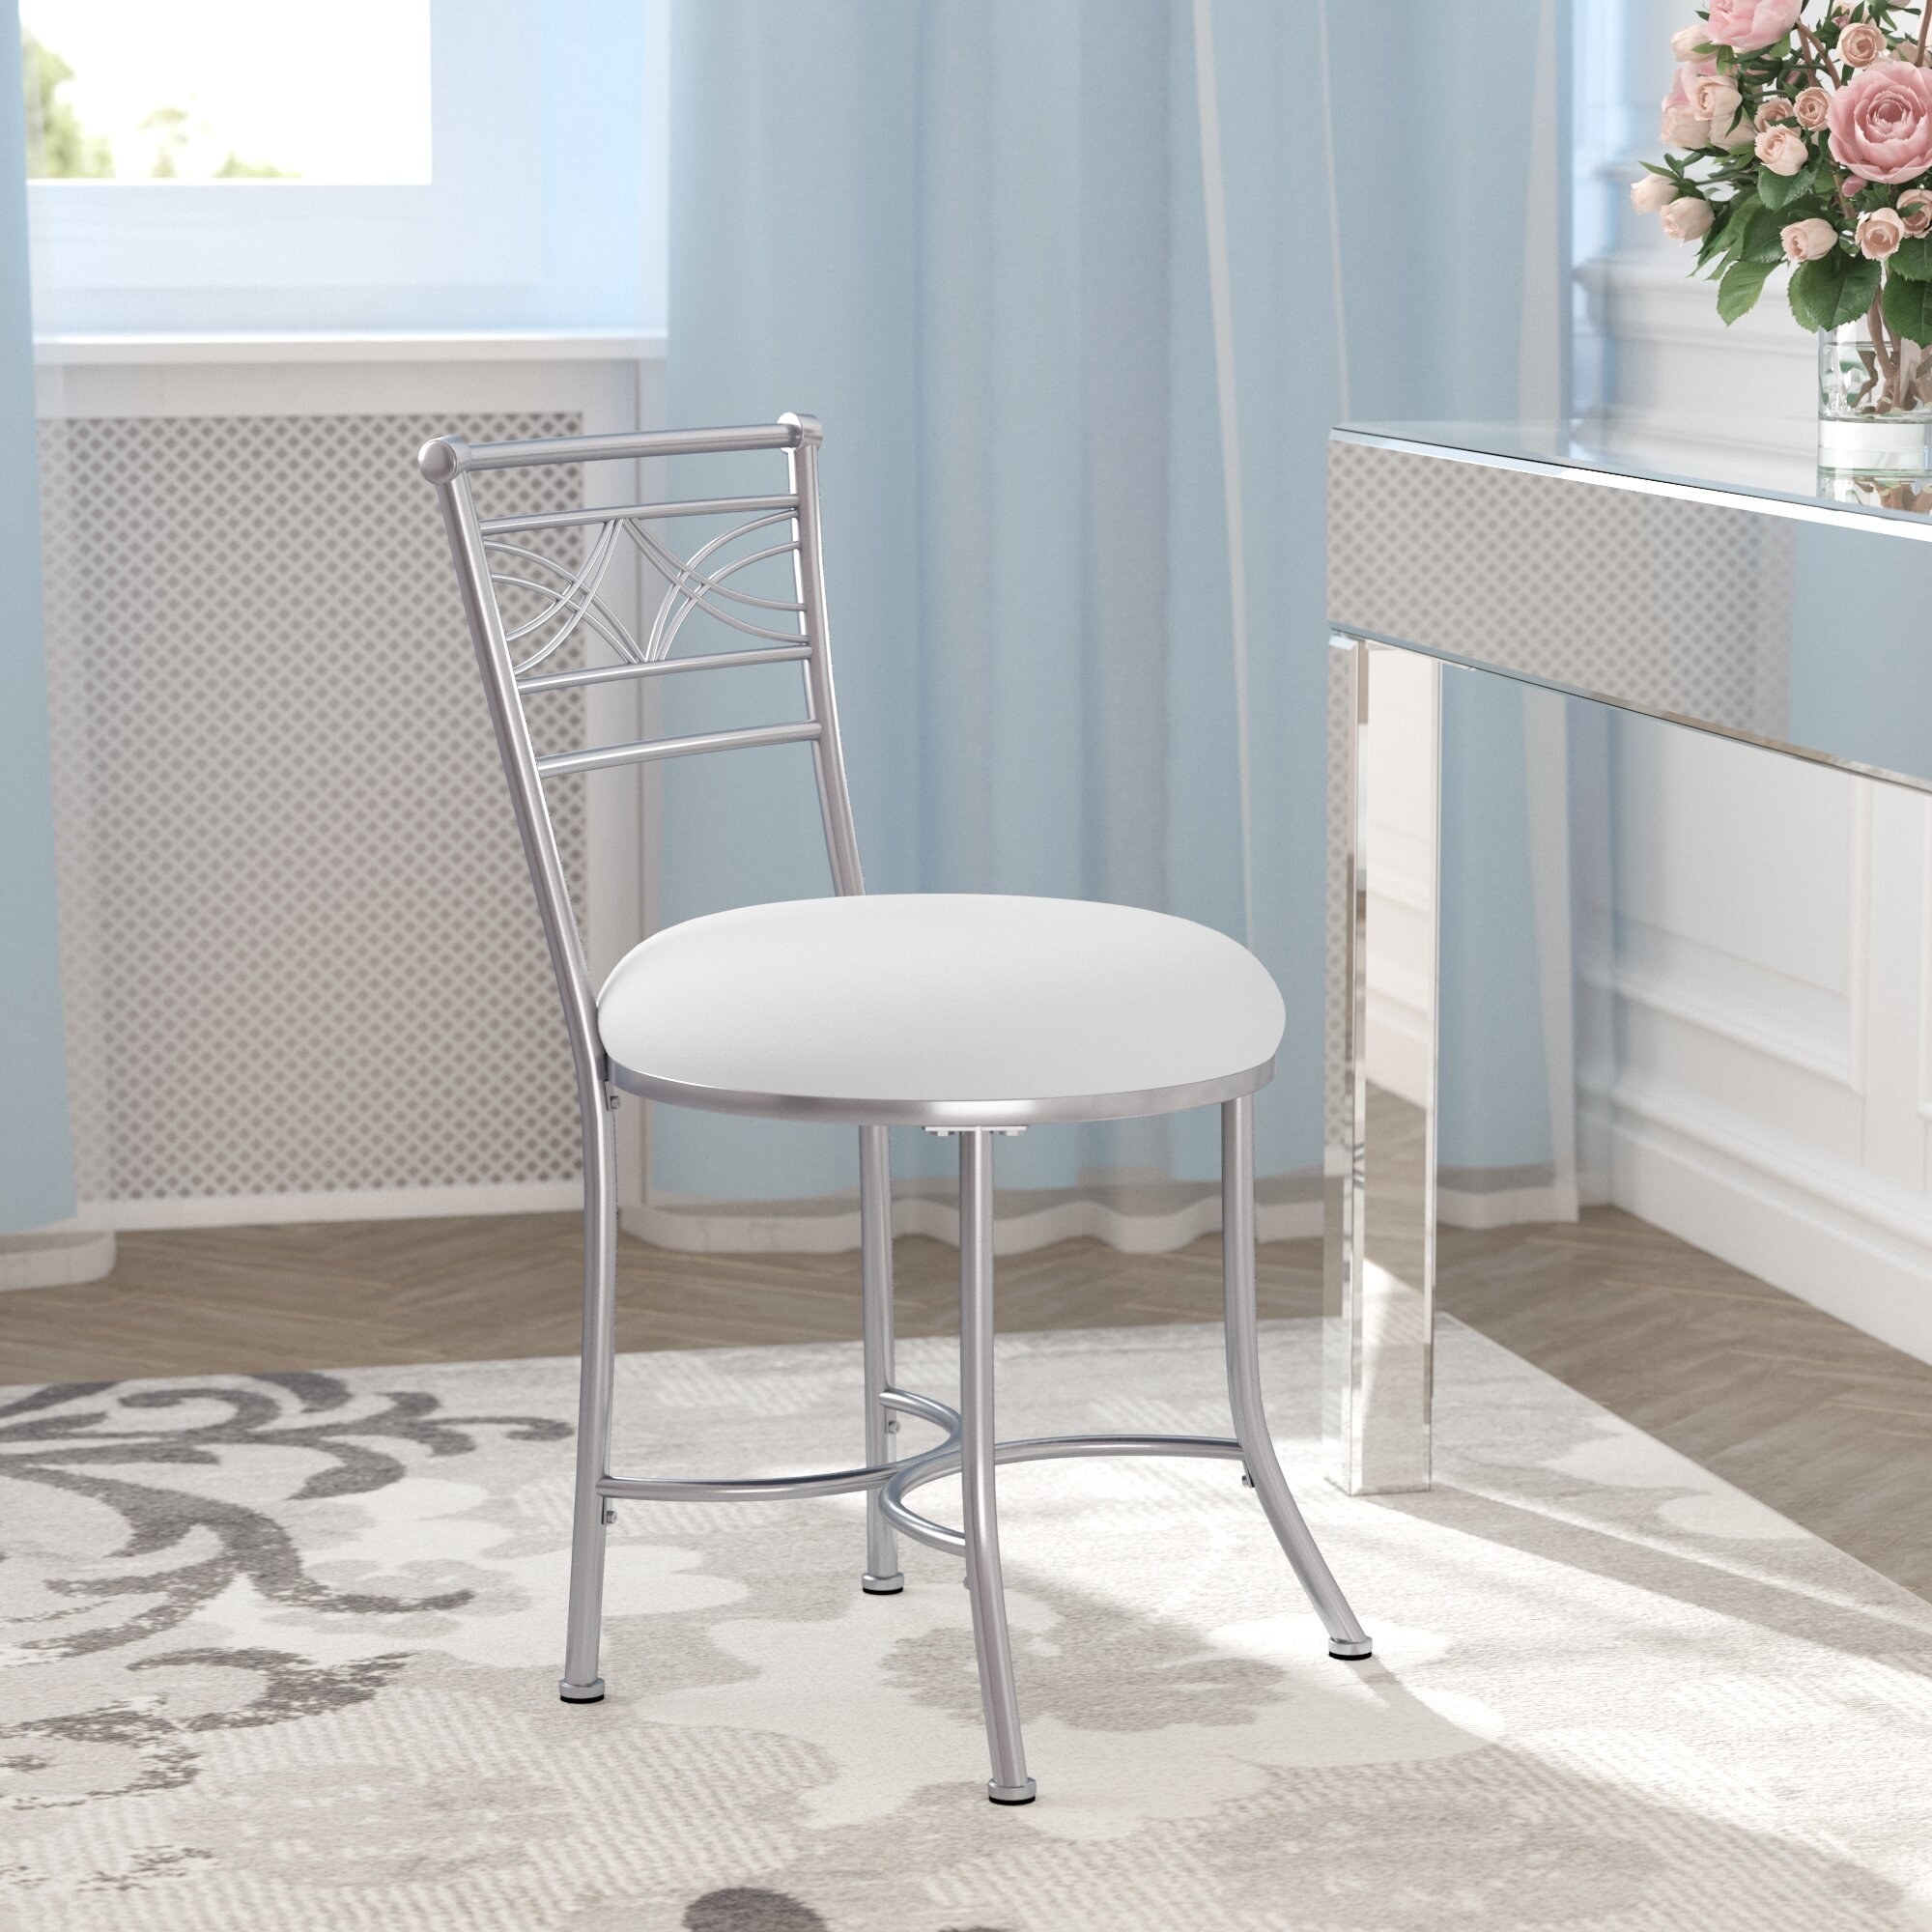 the silver stool with white cushion